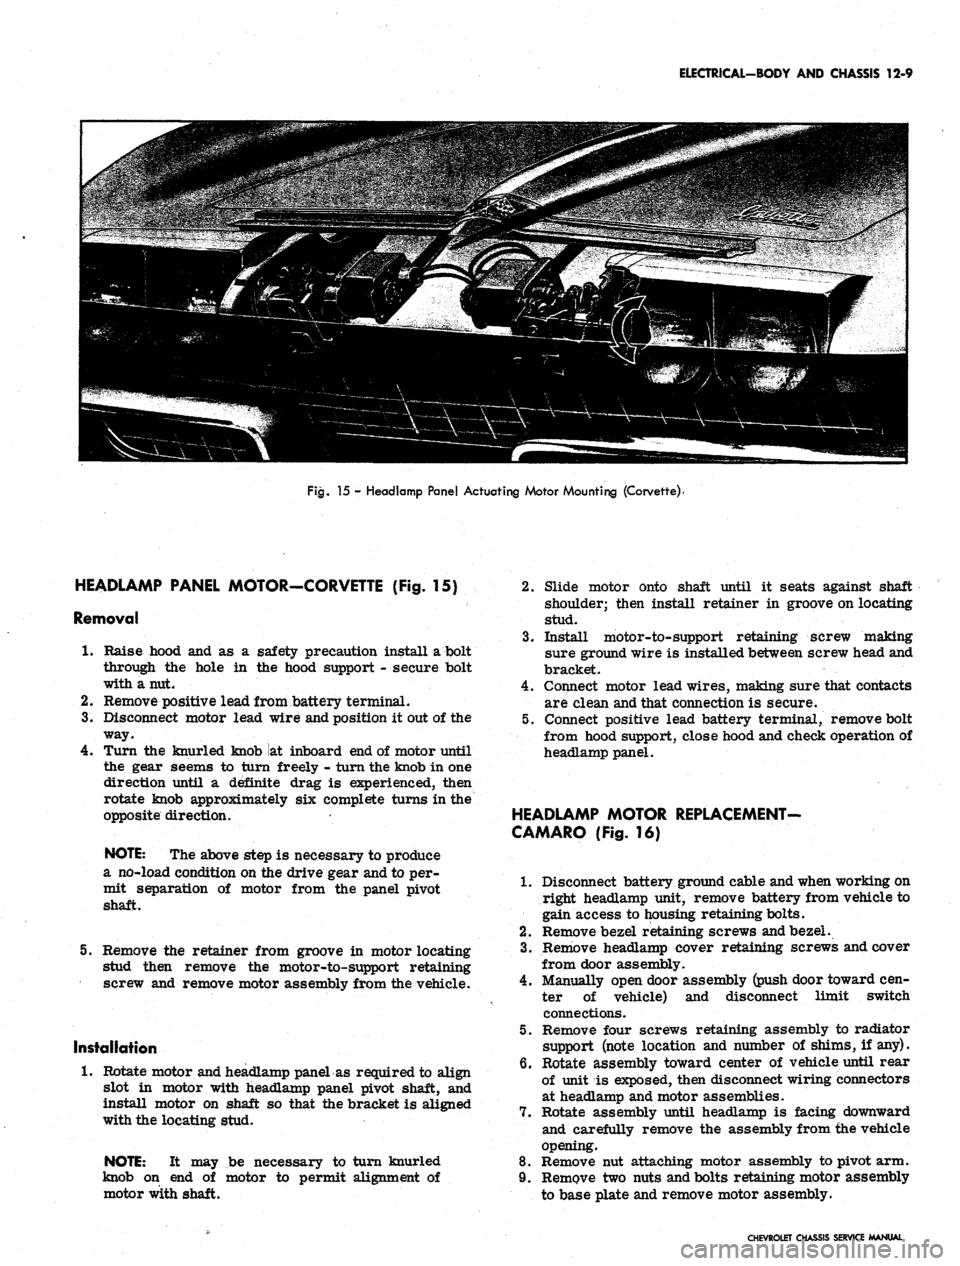 CHEVROLET CAMARO 1967 1.G Chassis User Guide 
ELECTRICAL-BODY AND CHASSIS 12-9

Fig.
 15 - Headlamp Panel Actuating Motor Mounting (Corvette)

HEADLAMP PANEL MOTOR-CORVETTE (Fig. 15)

Removal

1.
 Raise hood and as a safety precaution install a